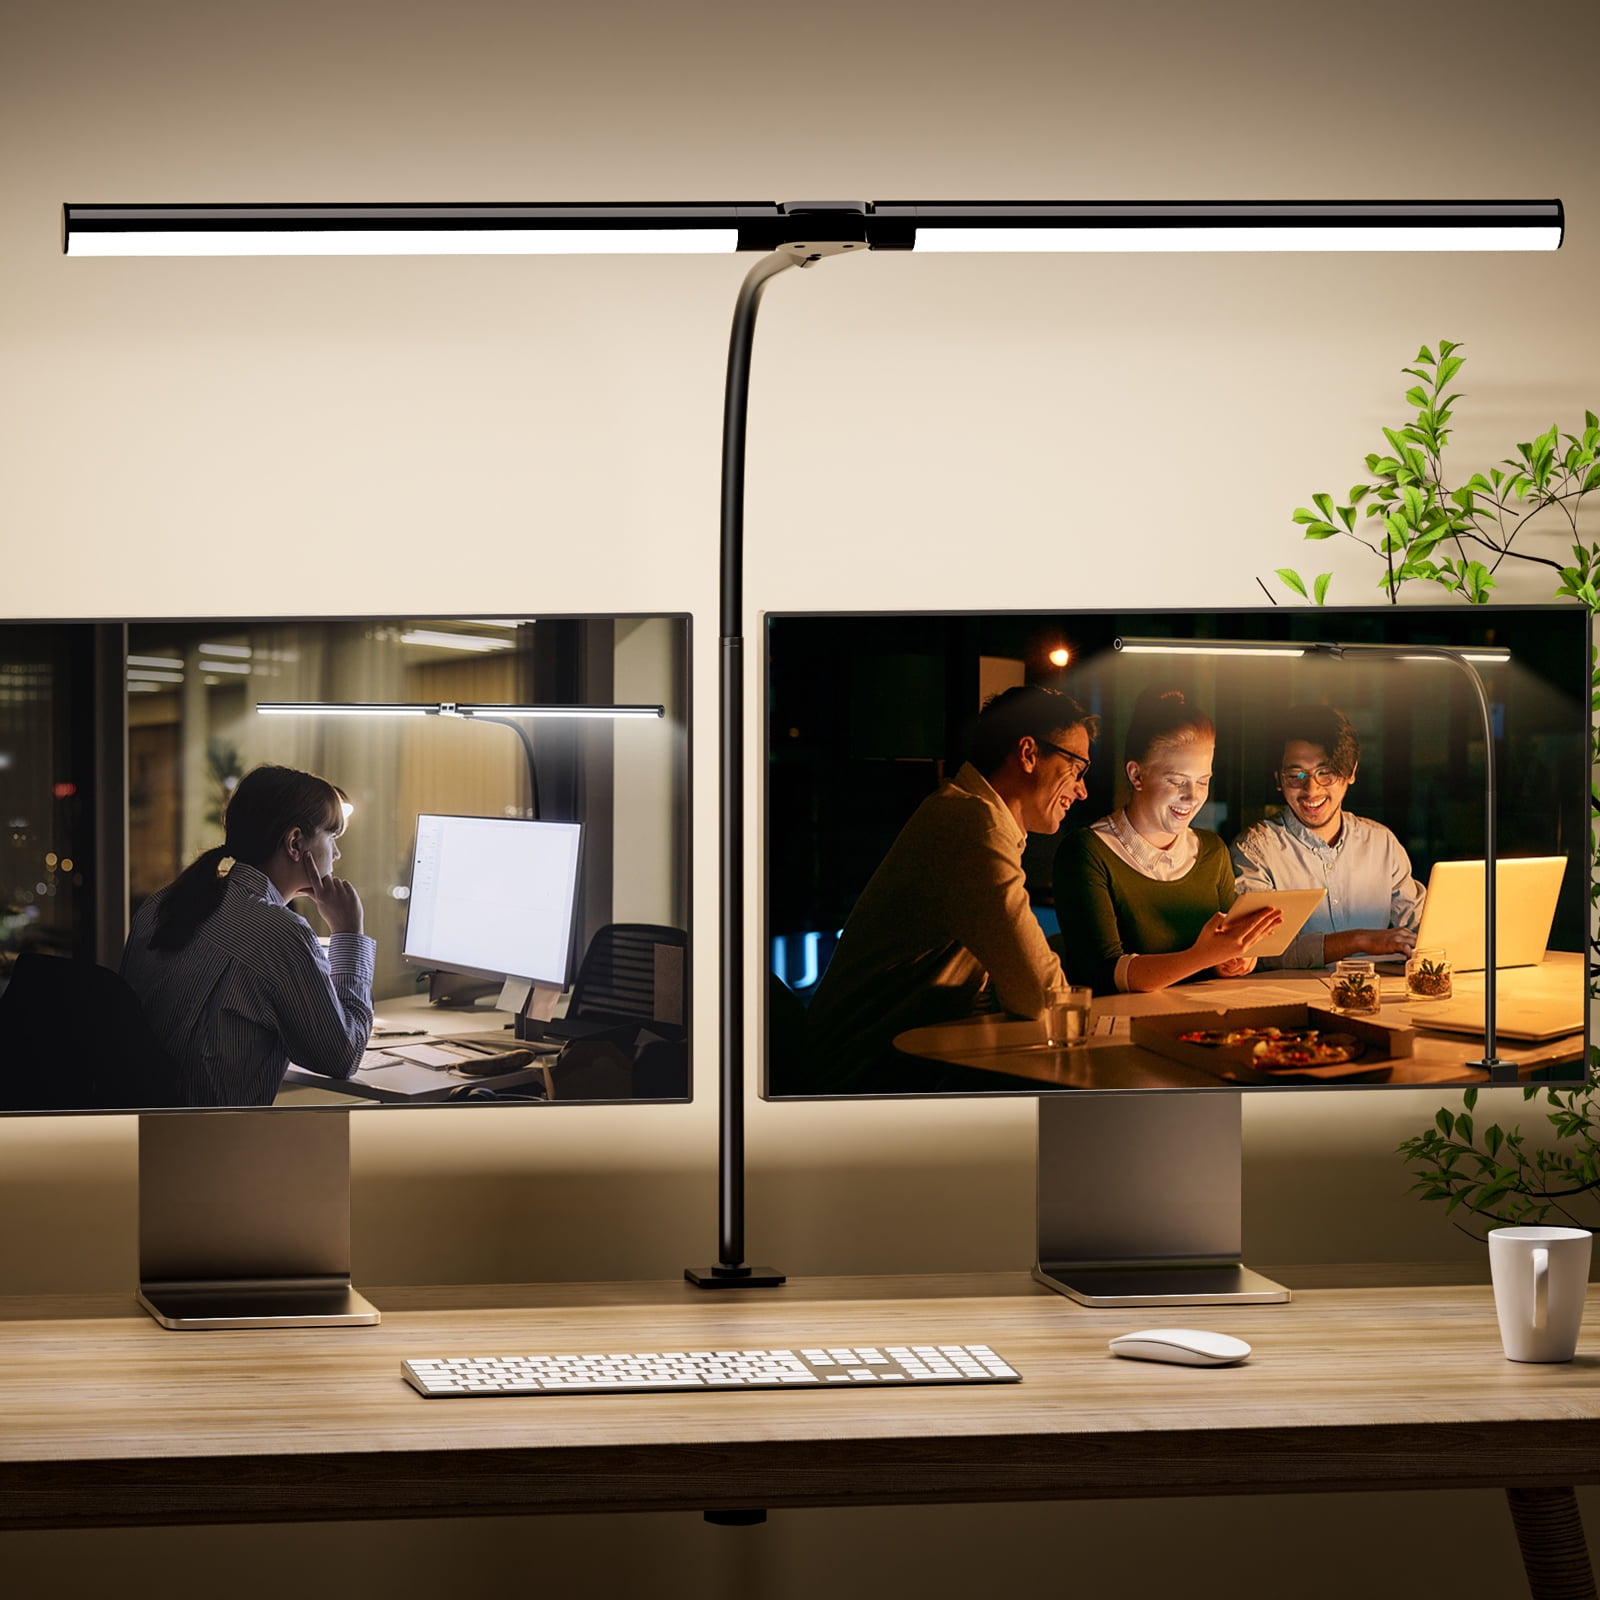 Quntis 31.5 Led Desk Lamp for Home Office, 1500 Lumen Extra Bright  Dimmable Double Head Desk Light with Clamp, 32 Lighting Modes Foldable  Monitor